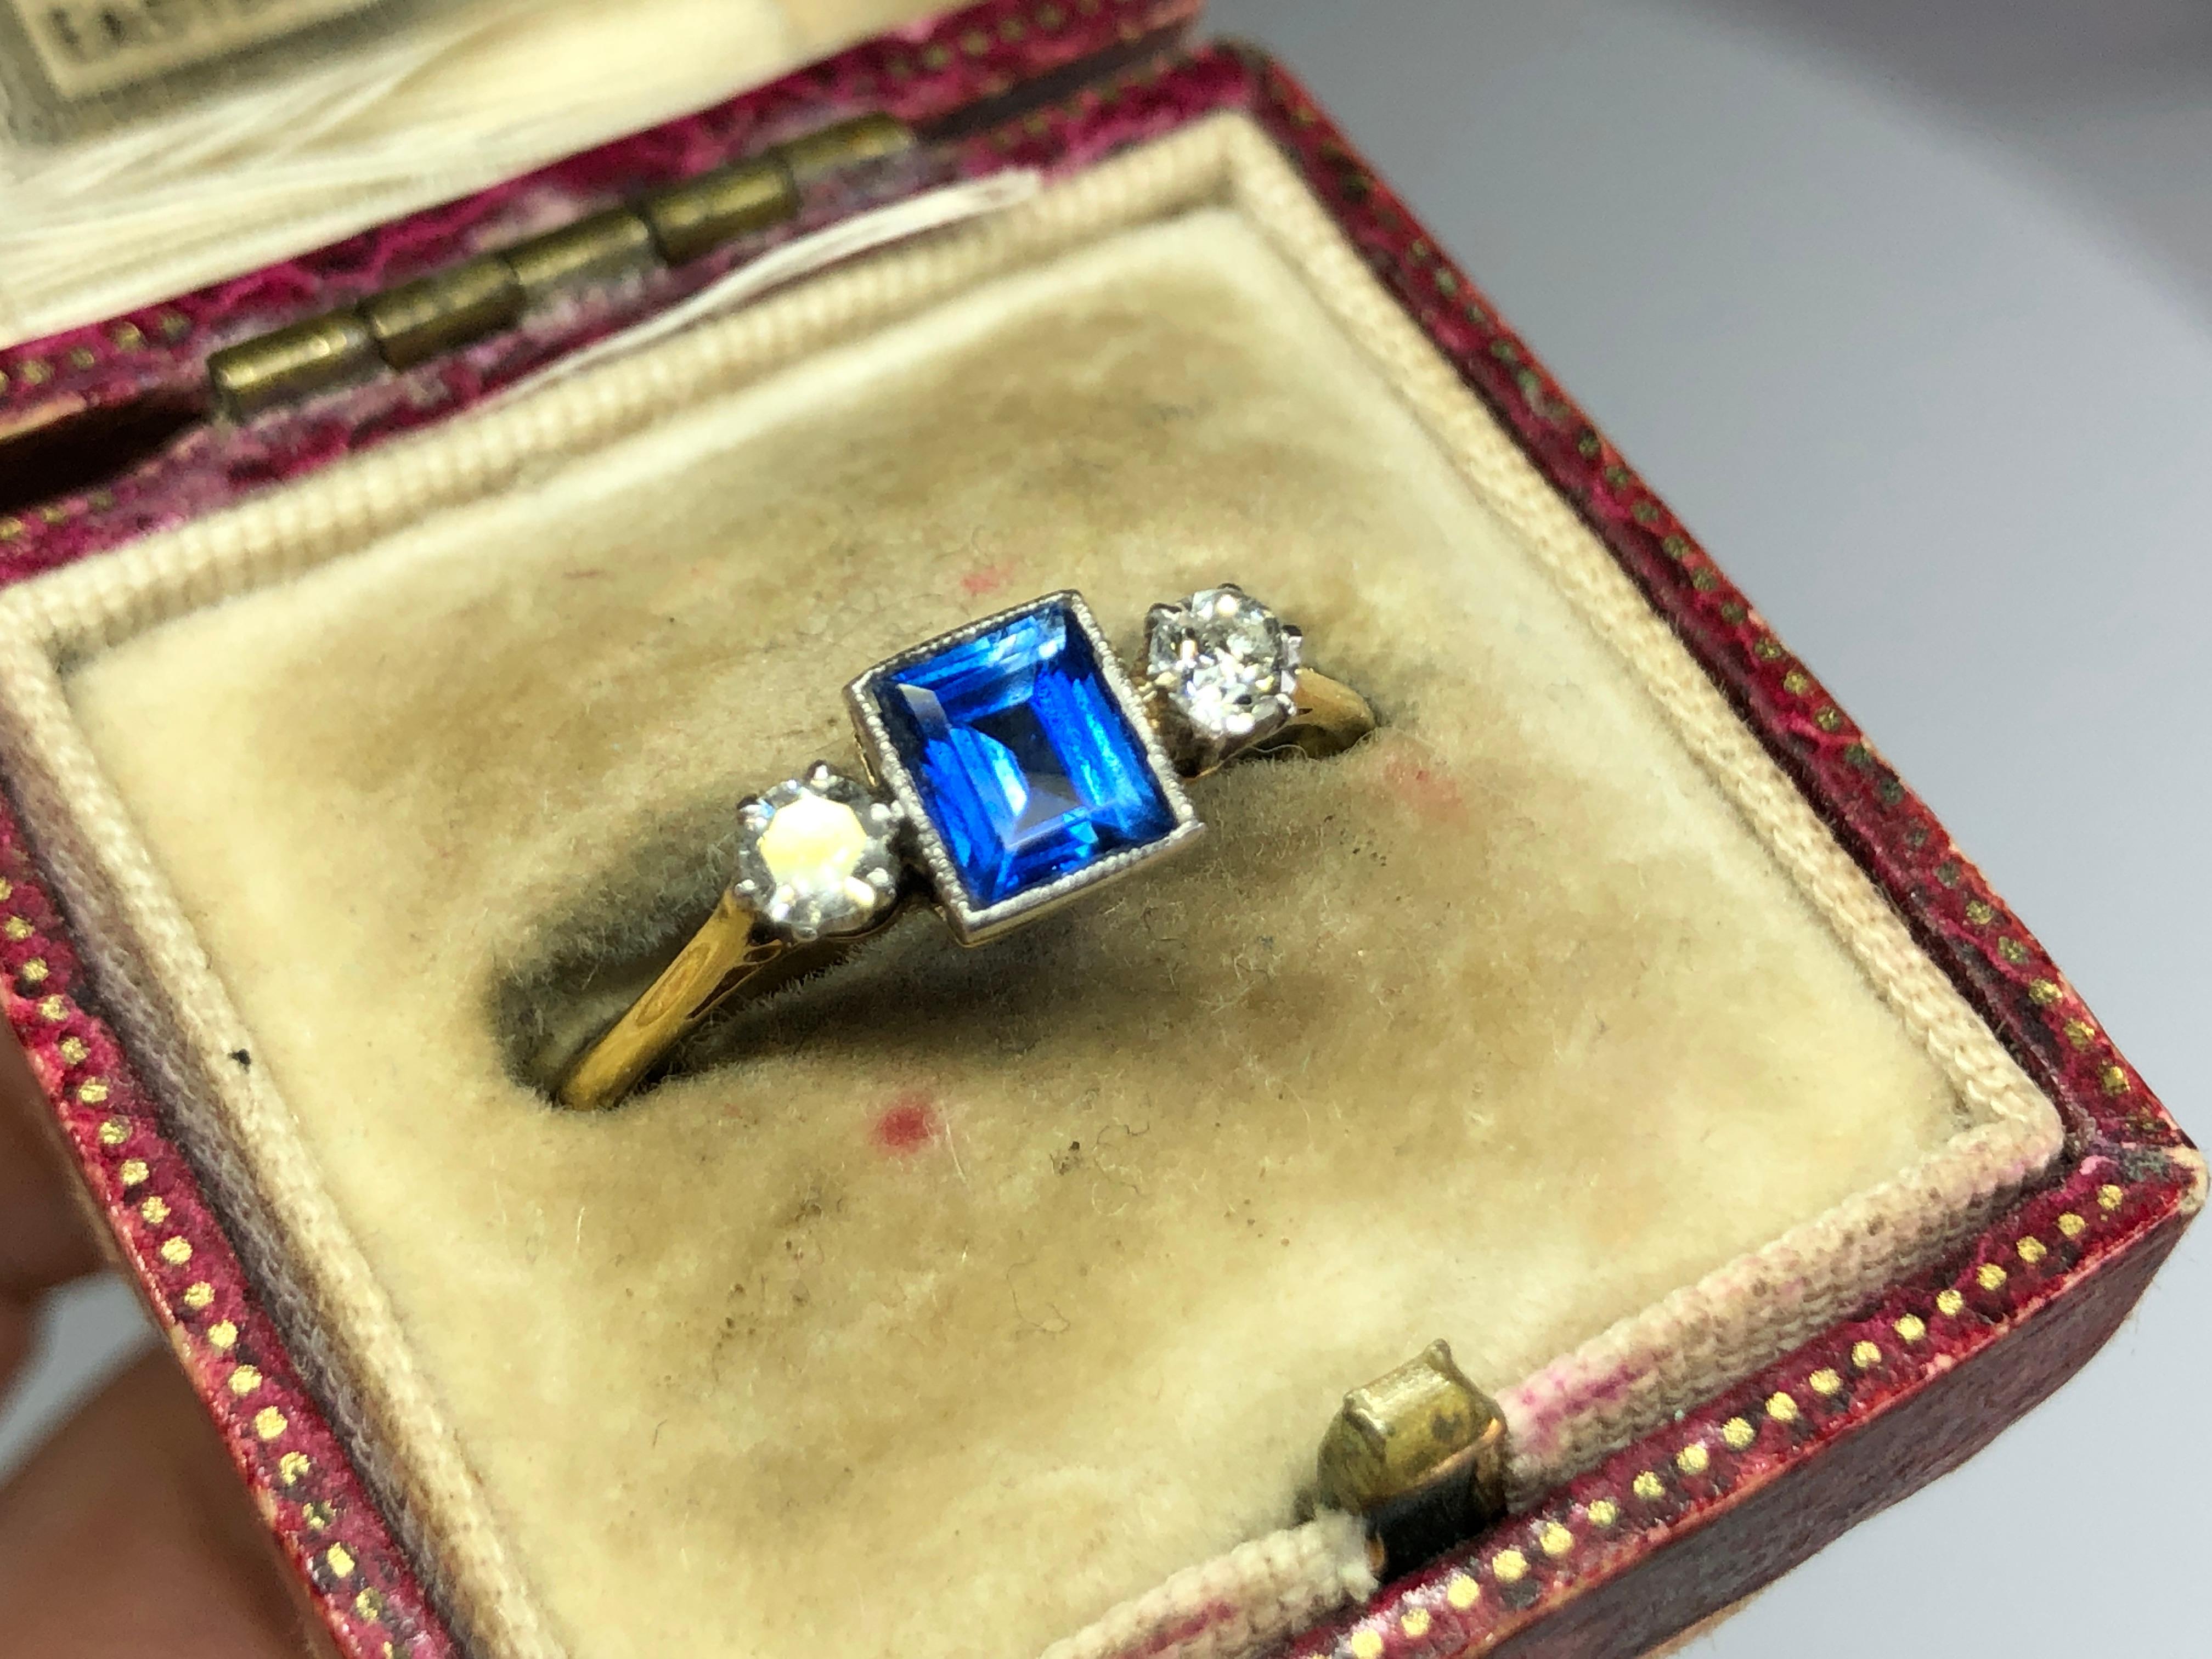 Antique Edwardian sapphire diamond three stone ring. Set in 18-carat gold and platinum. Total diamond weight approximately 0.4 carats, H/I colour, VS2 clarity. The central sapphire of this lovely antique ring is approximately 0.65 carats which has